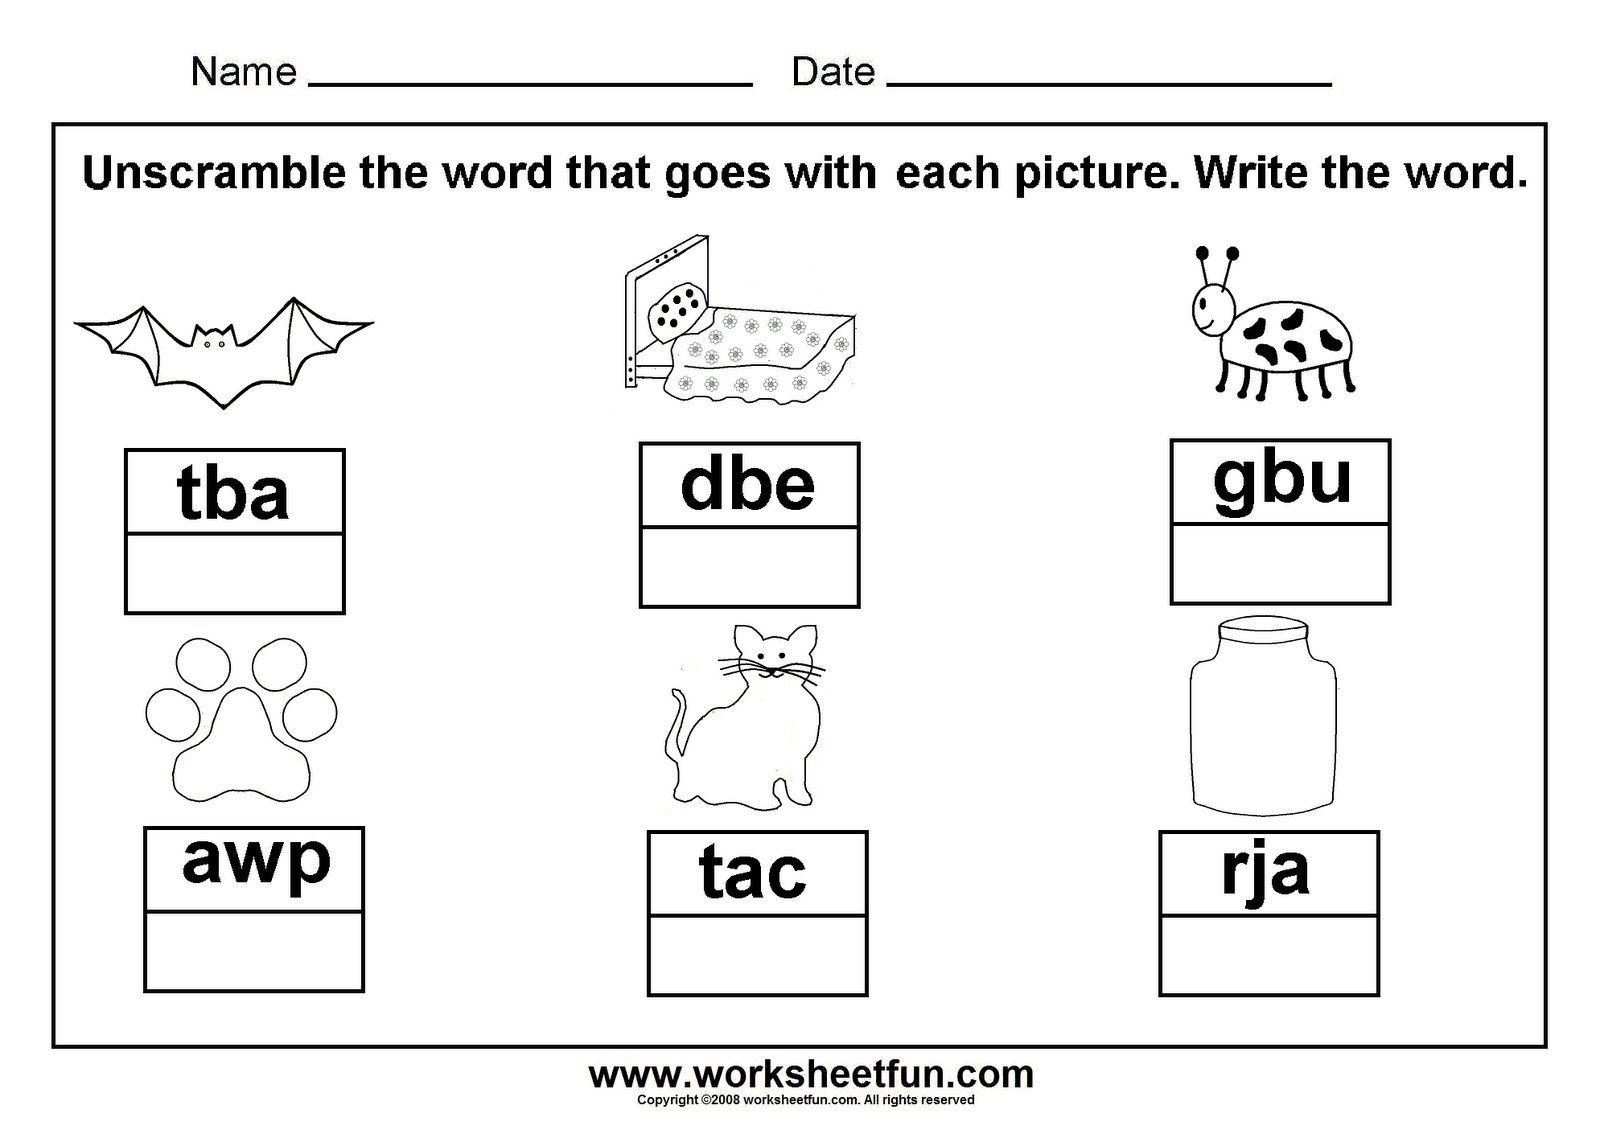 Unscramble Cvc Words; Great To Laminate And Put In A Word Work - Cvc Words Worksheets Free Printable